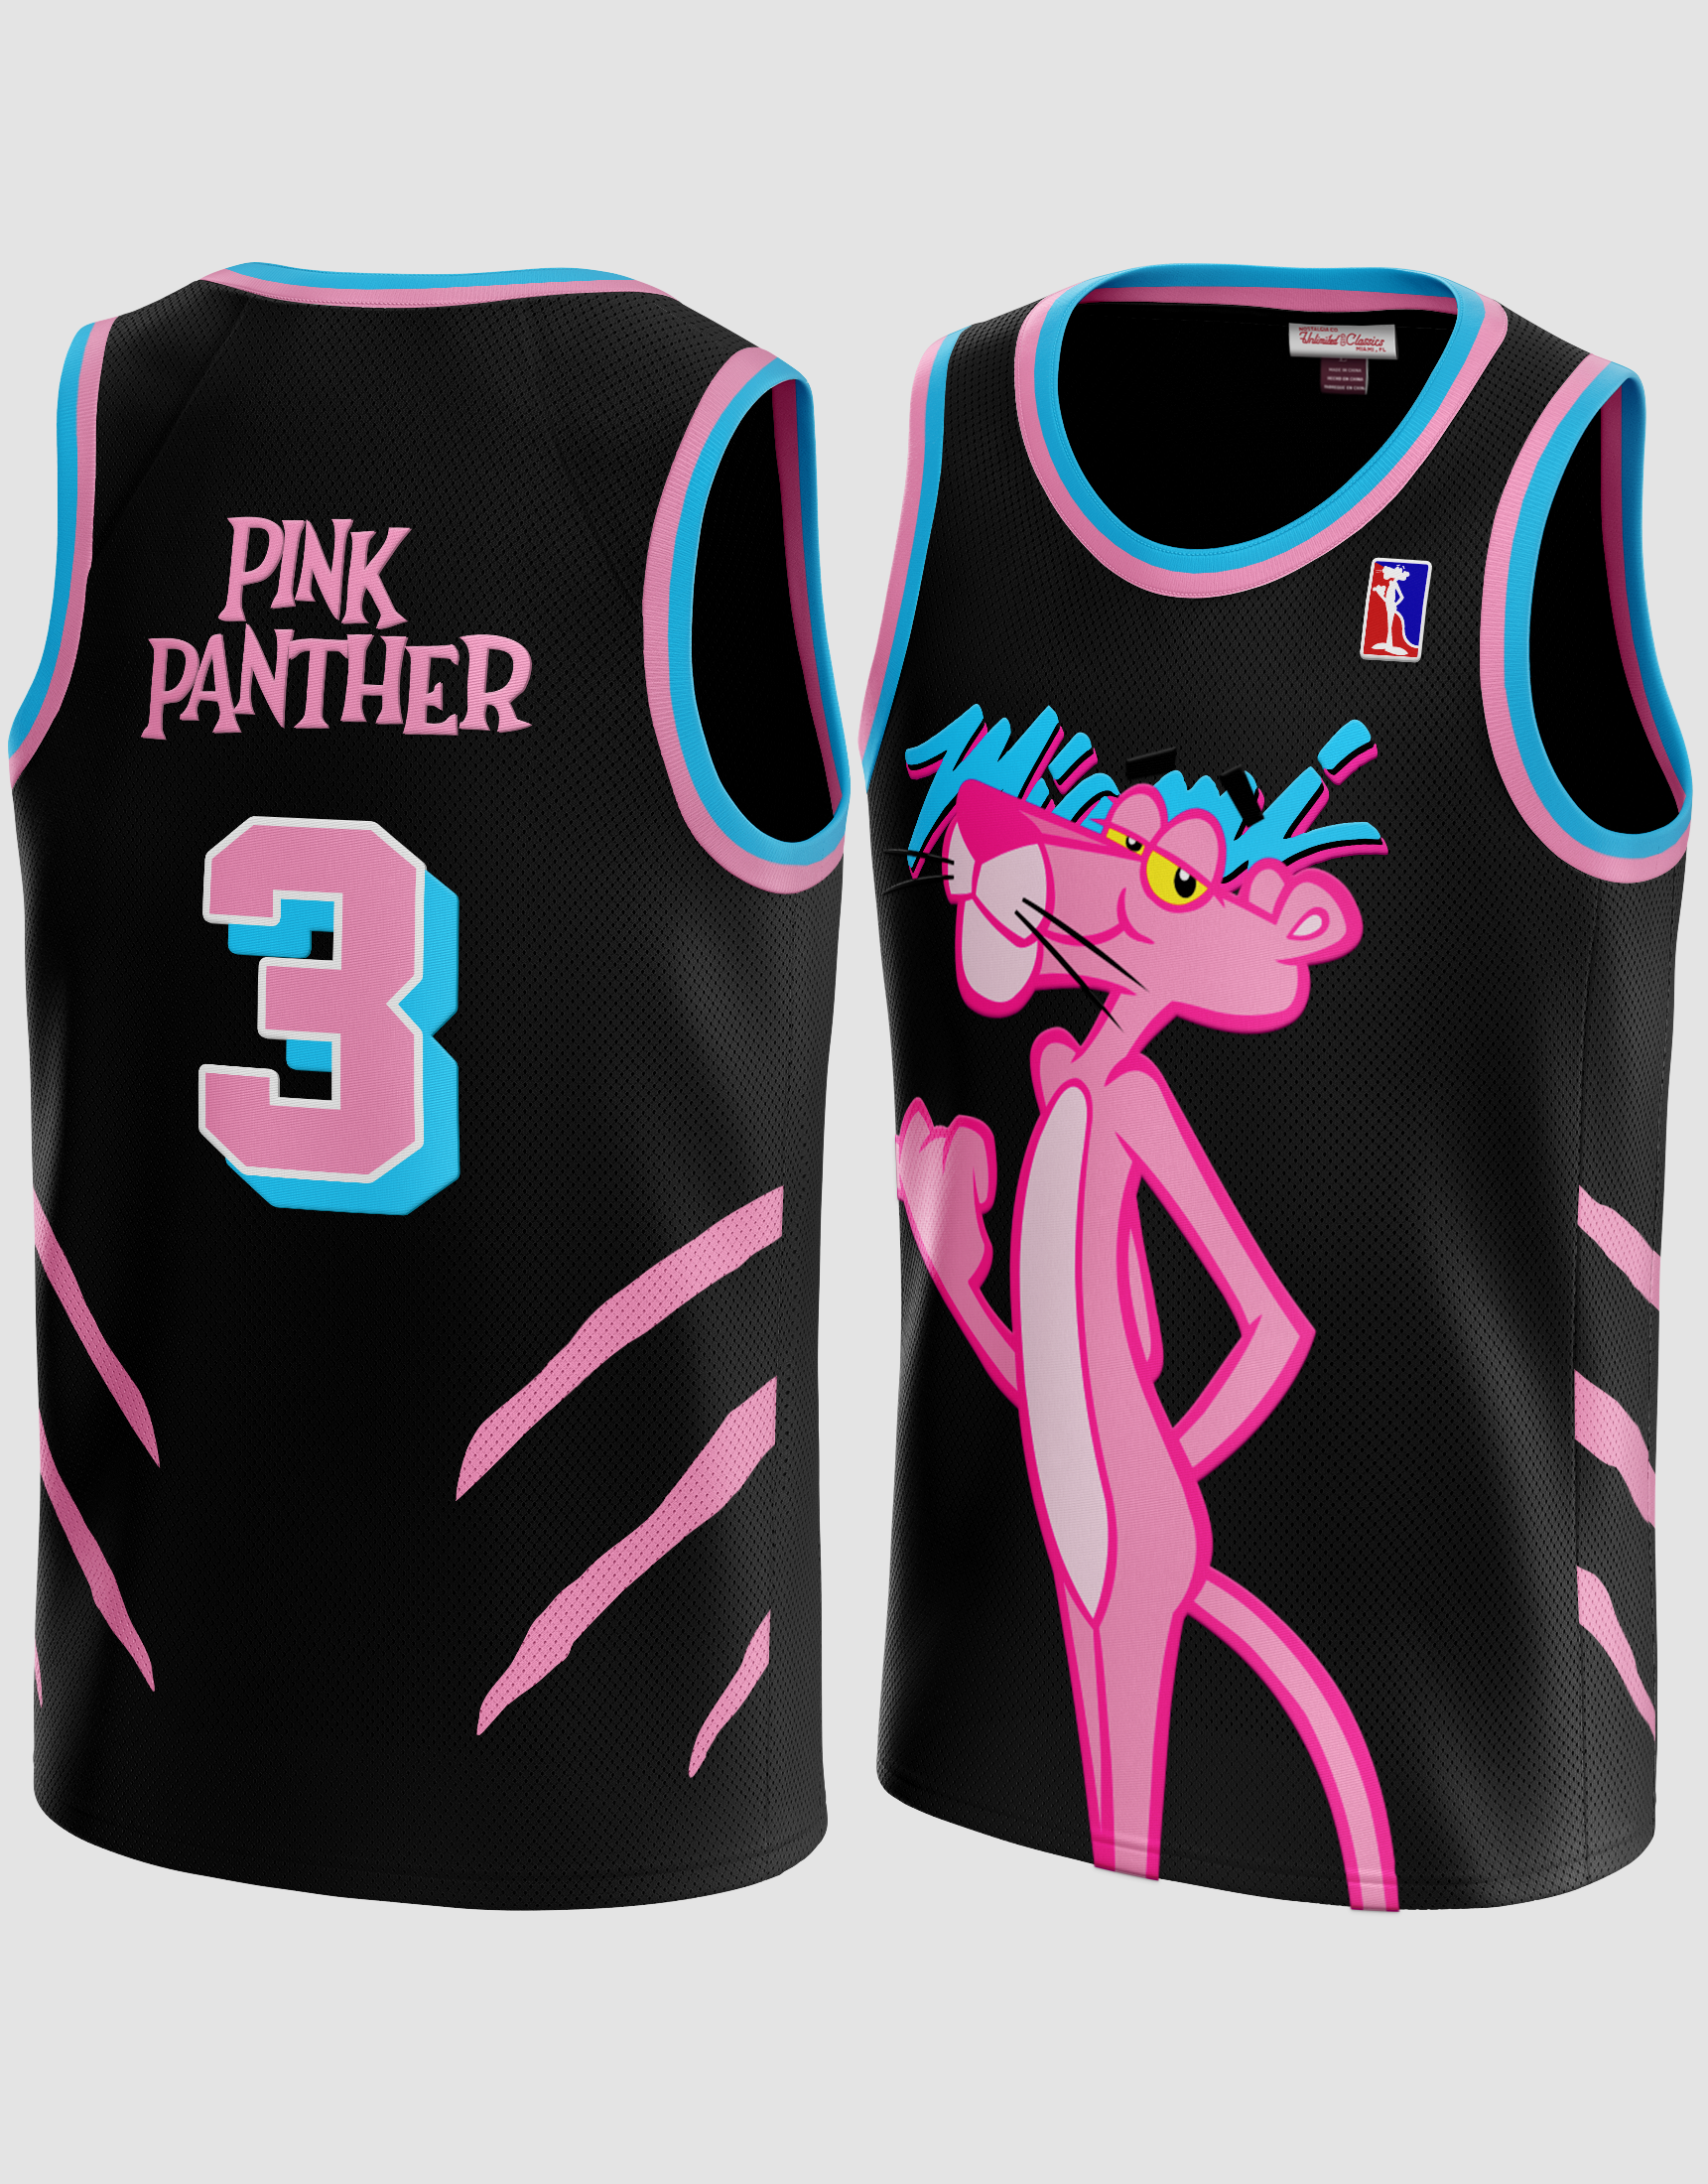 Your Team Men's Movie Basketball Jersey Pink Panther Sports Fan Clothing Blue M, Size: Medium